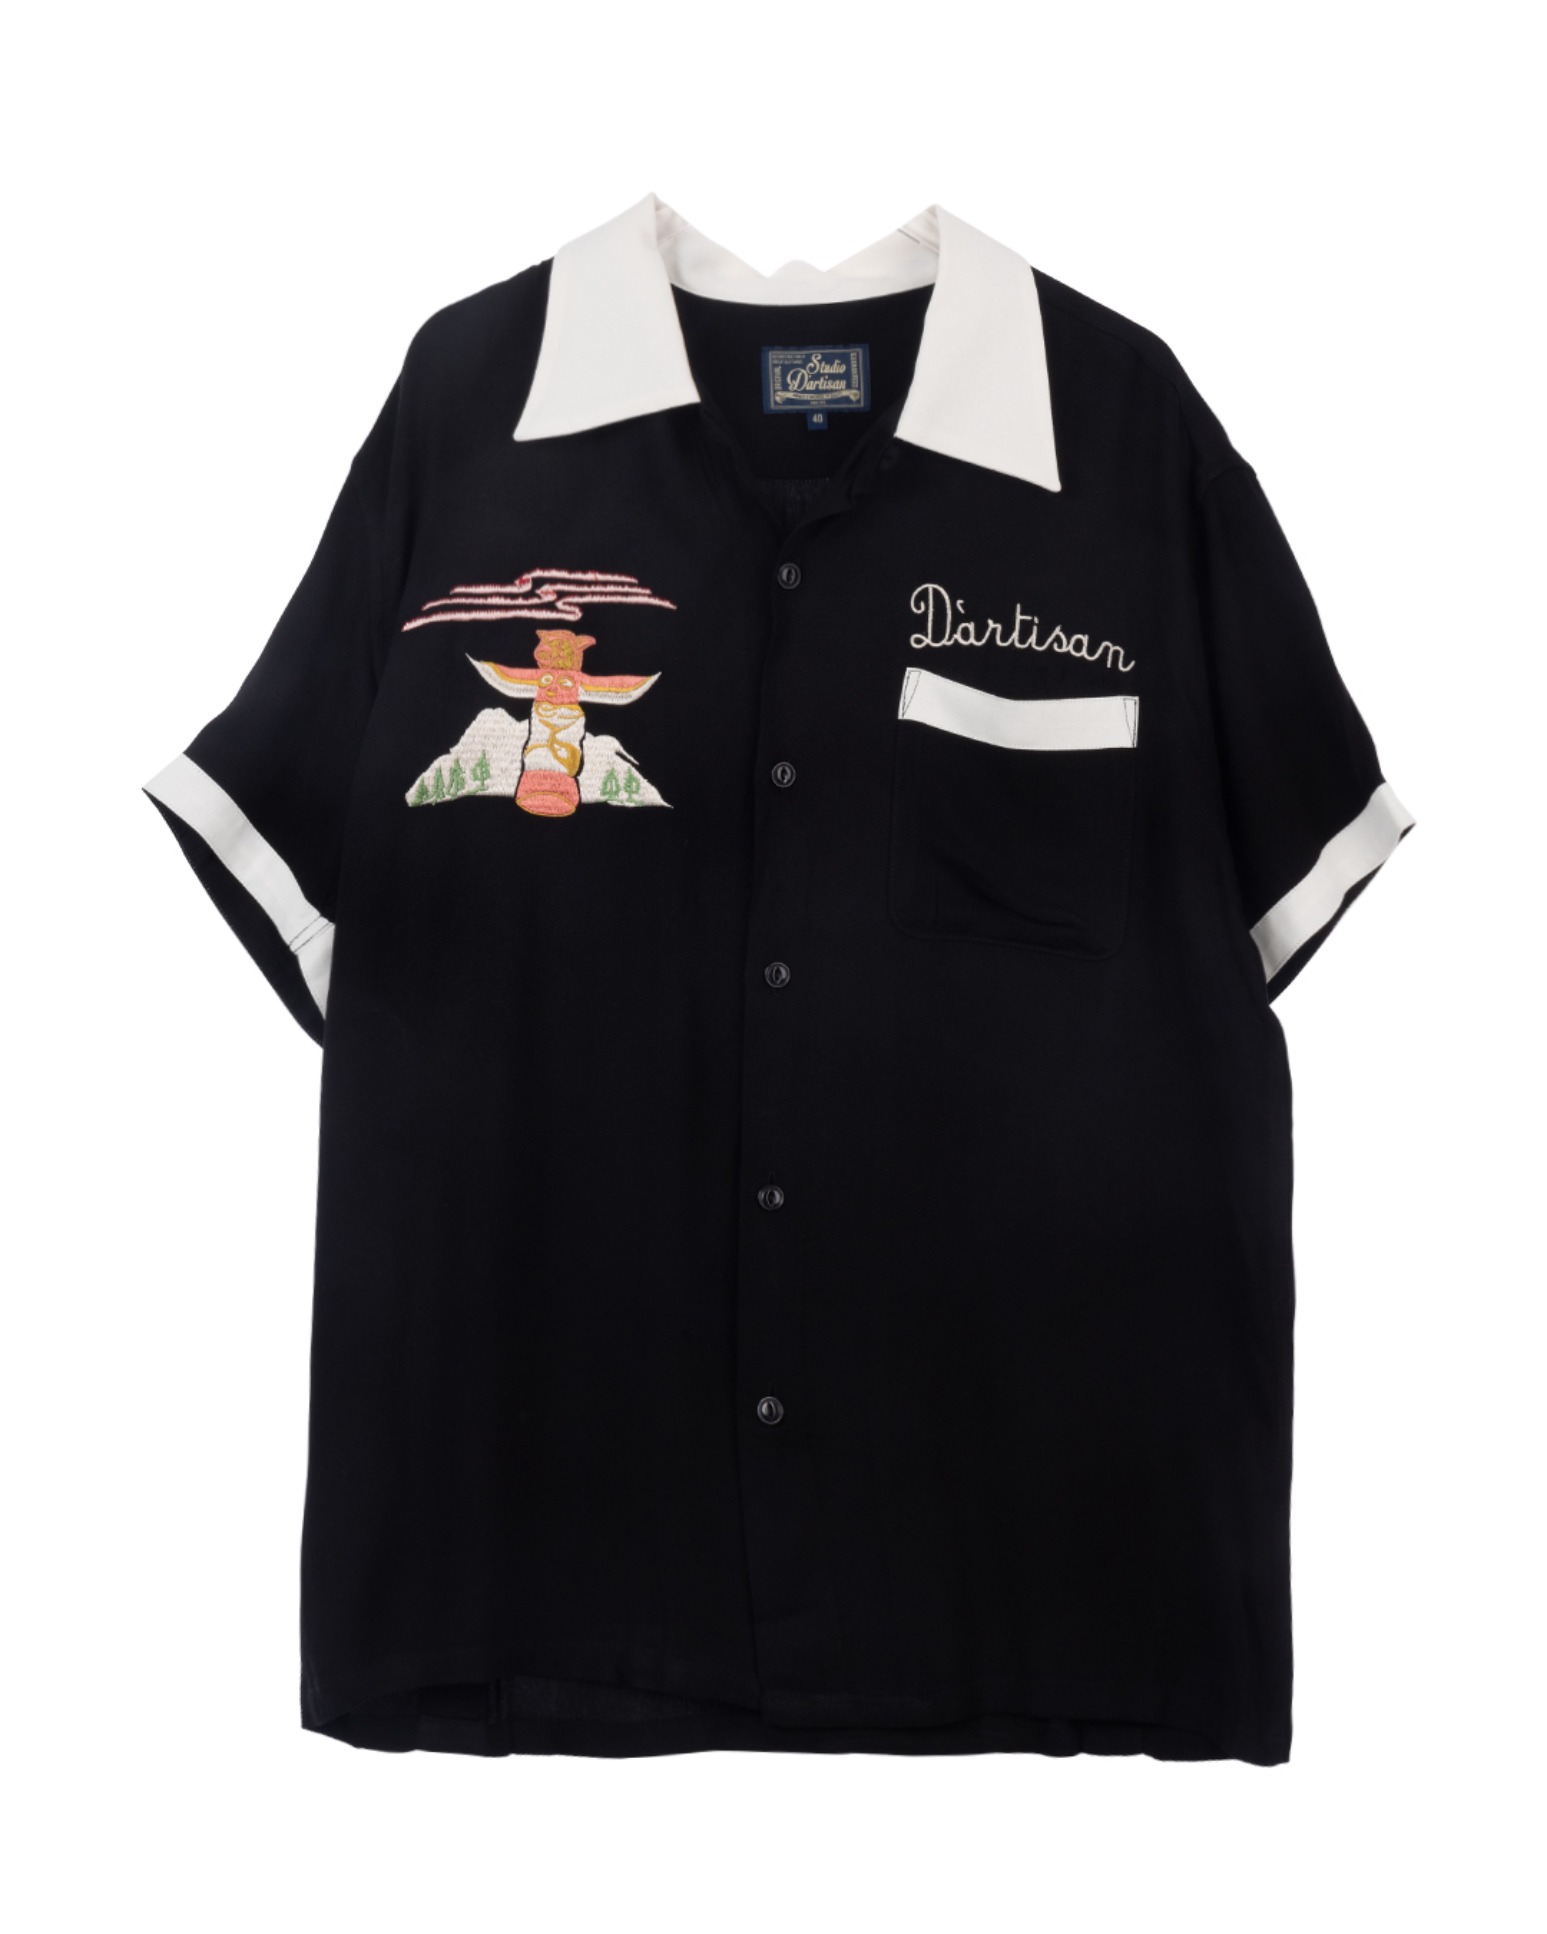 5710 Embroidered Bowling Shirt (Black)